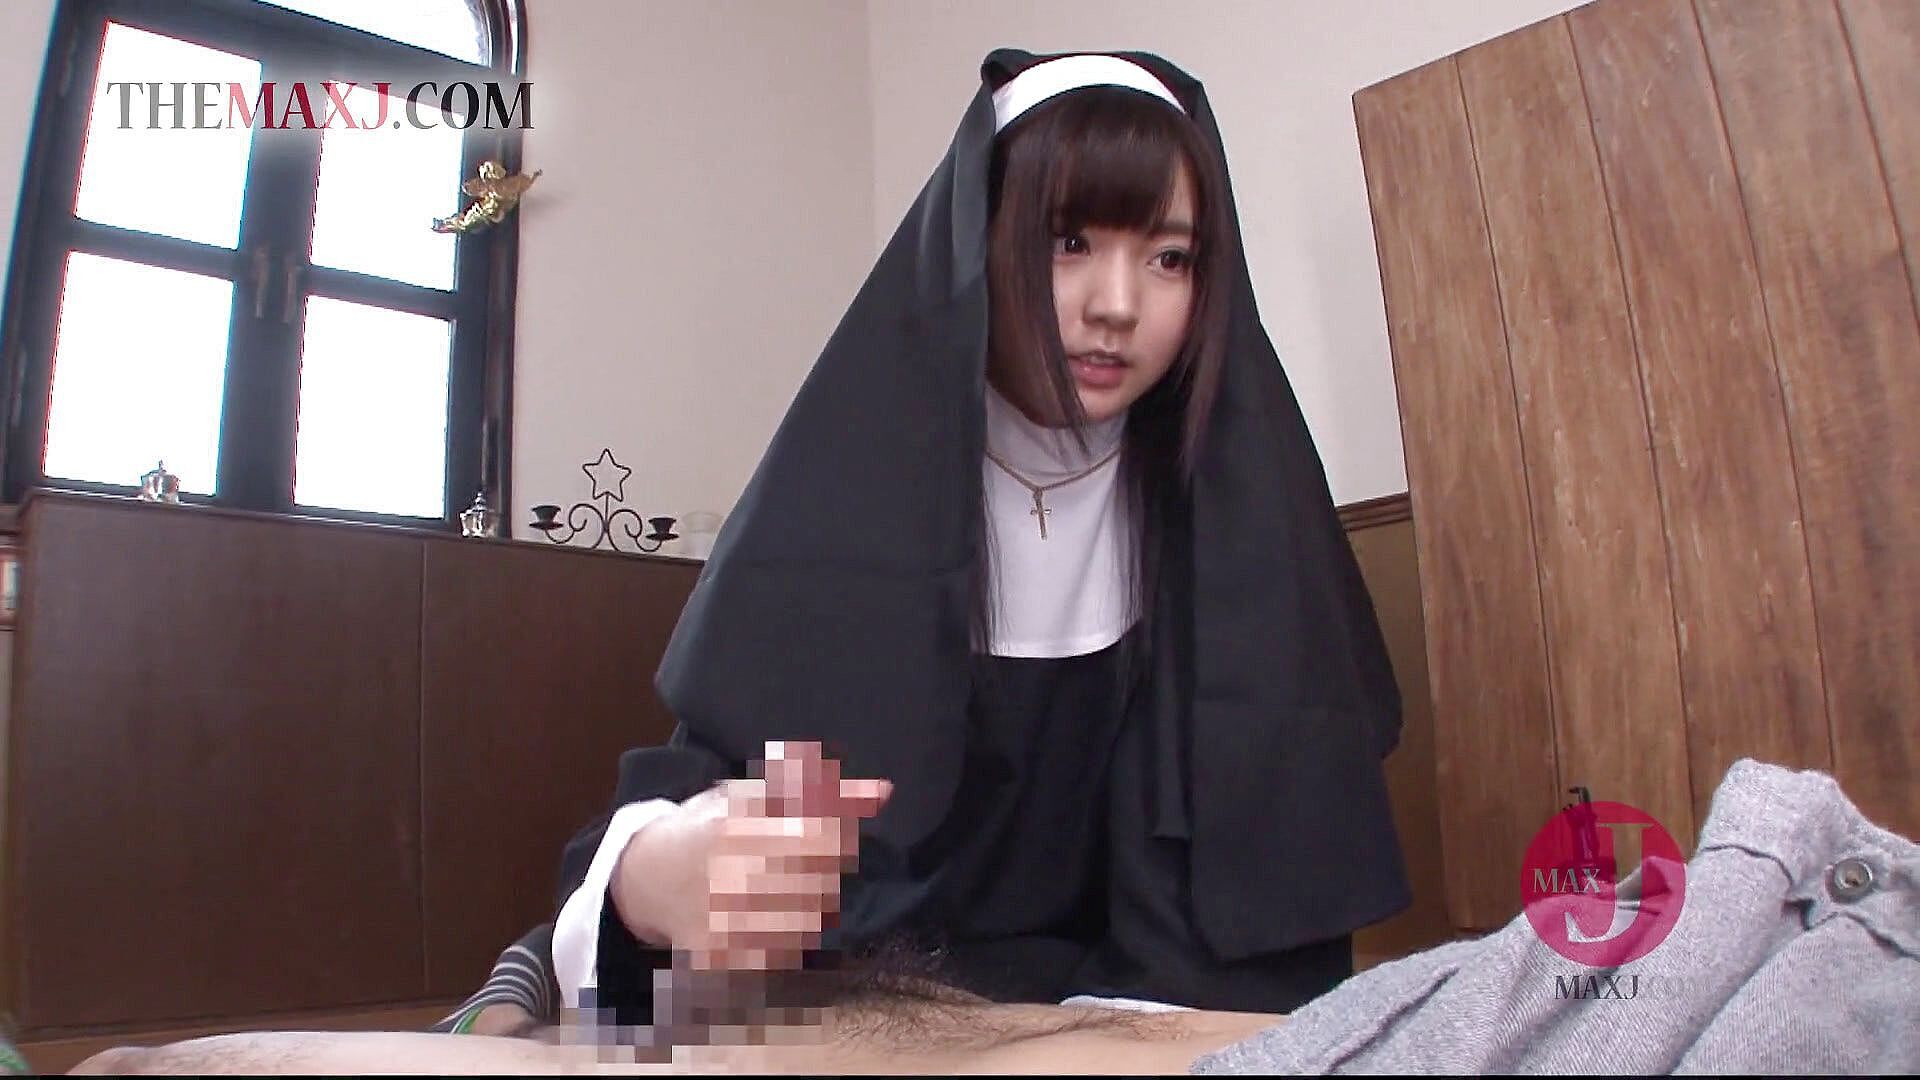 Cleaning asshole with tongue: Asian nun gives good handjob in POV –  – Asian happy ending